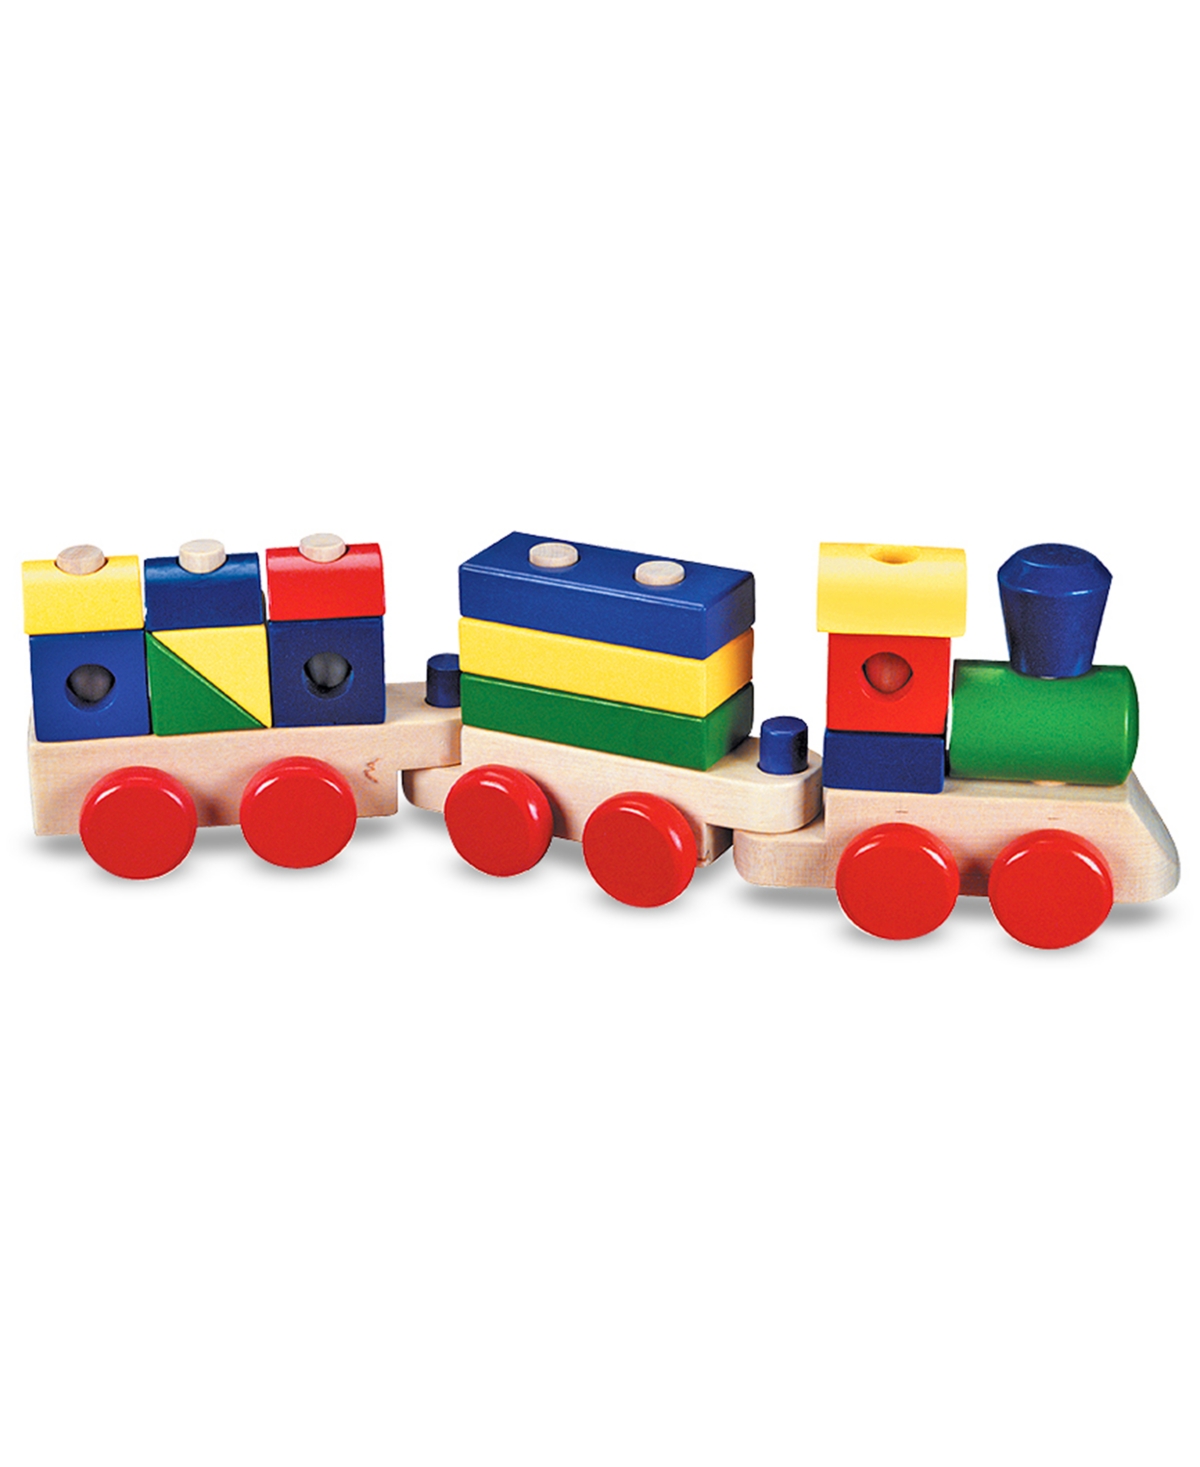 Melissa & Doug Kids' Toy, Stacking Train In No Color